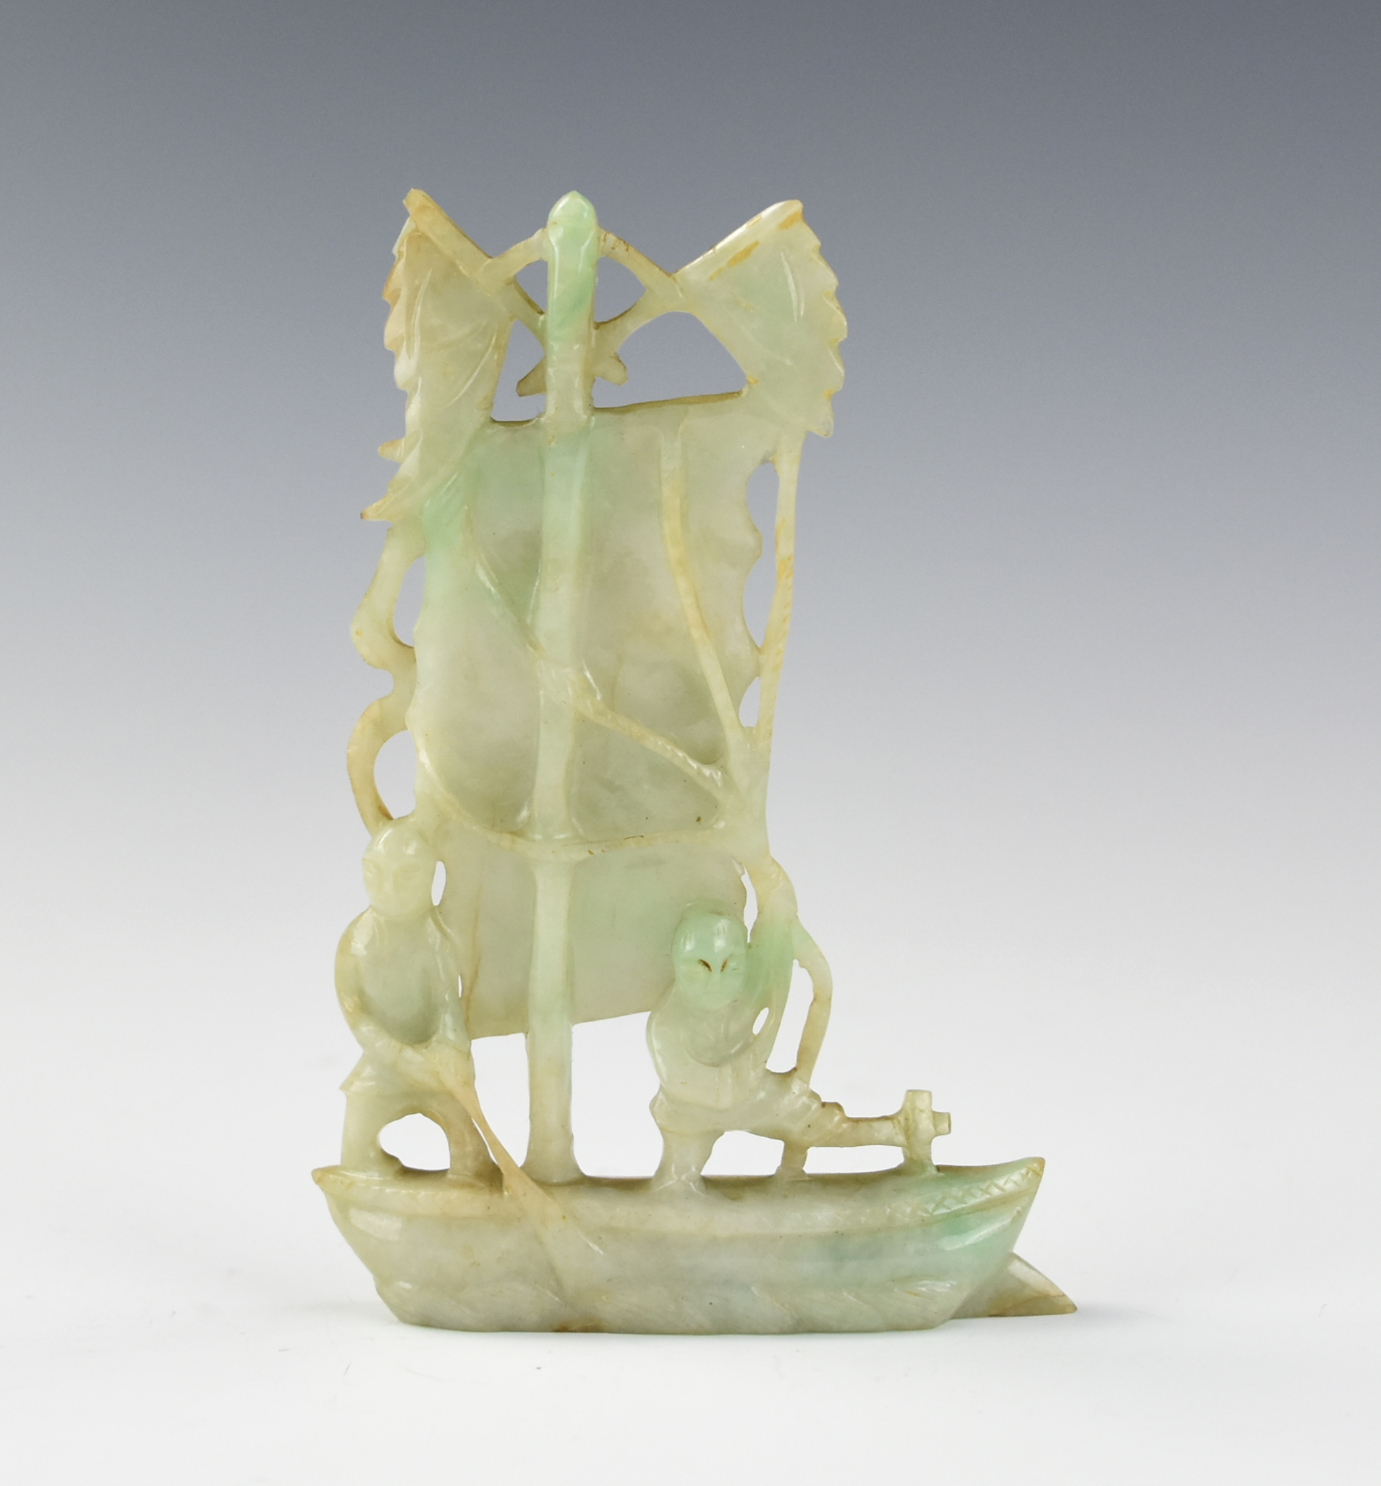 CHINESE JADEITE CARVING OF SAILBOAT 2ced46